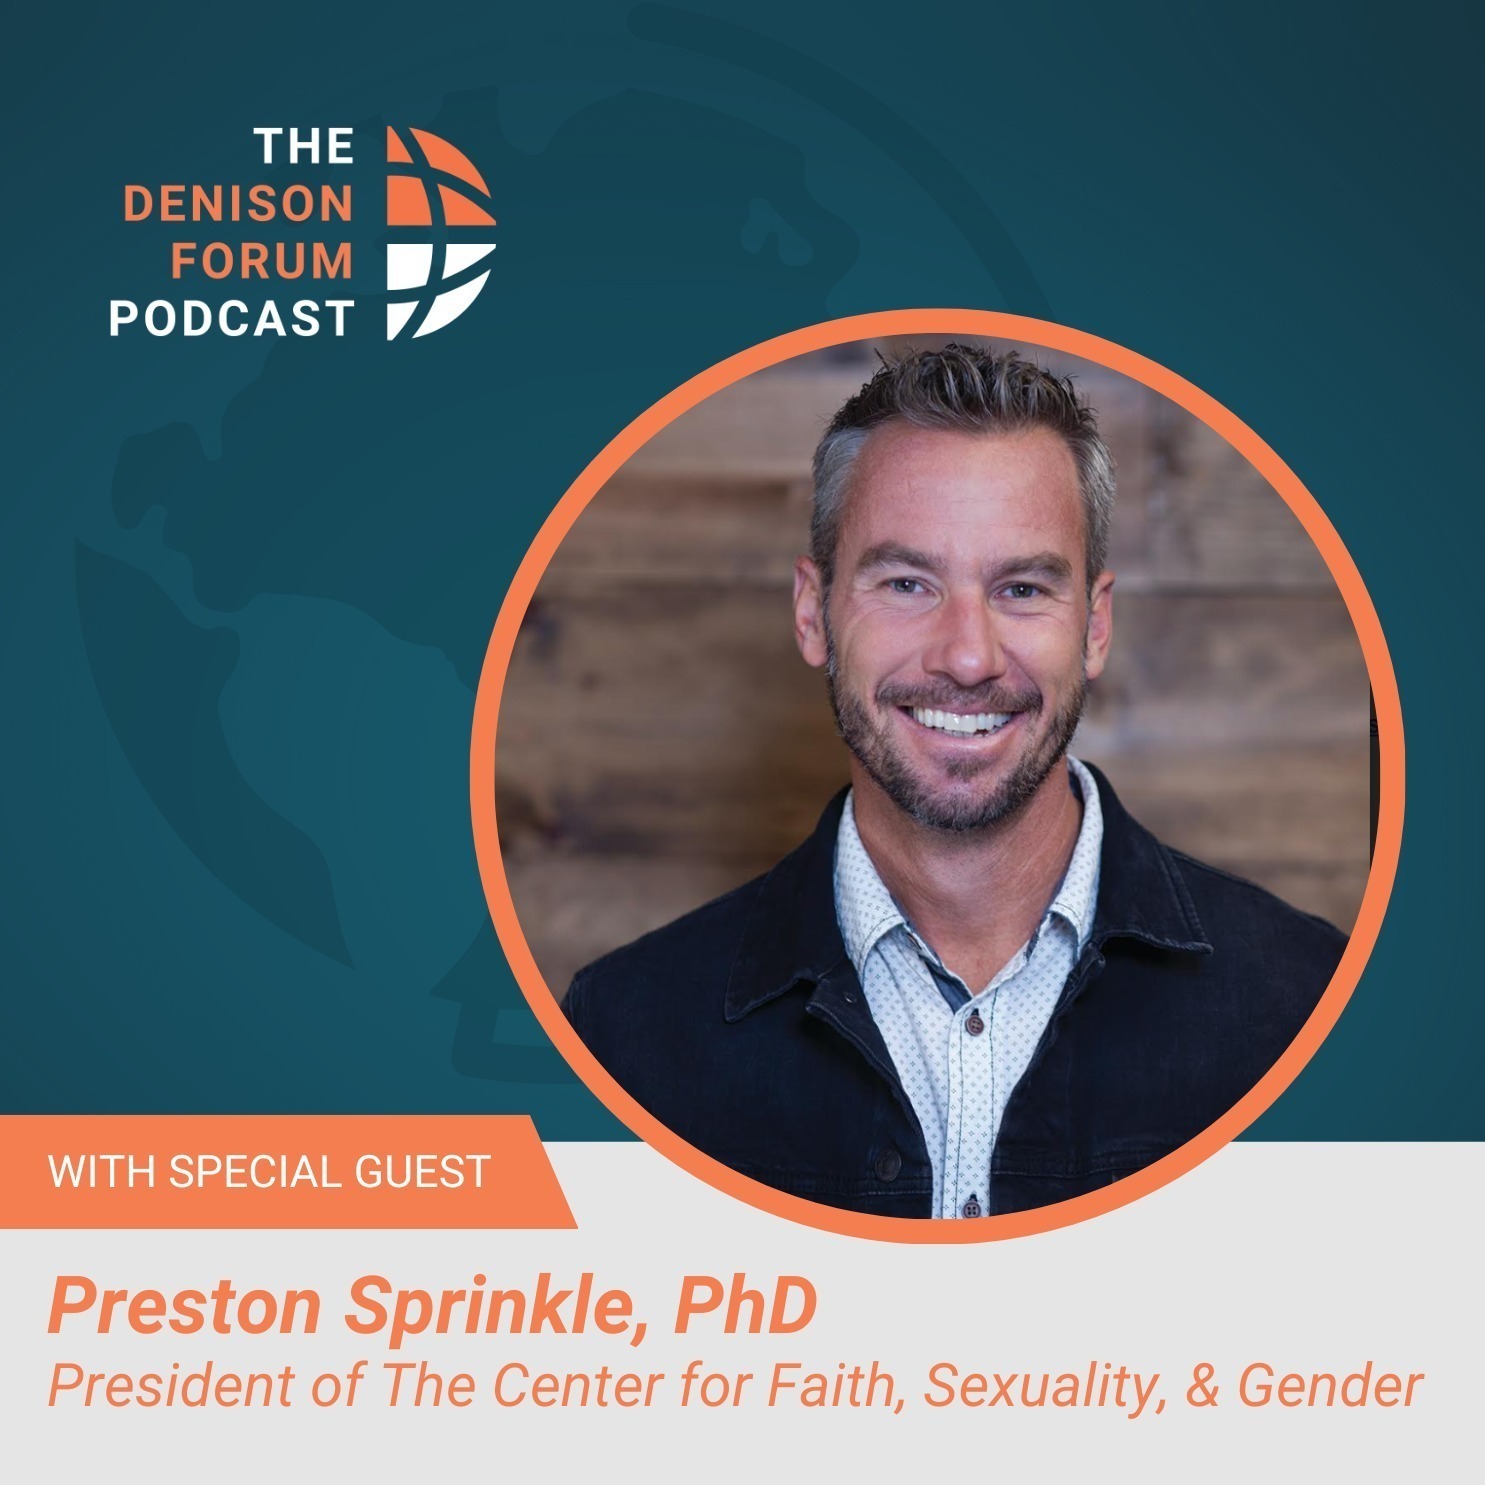 How political should Christians be? Preston Sprinkle discusses his new book, “Exiles”